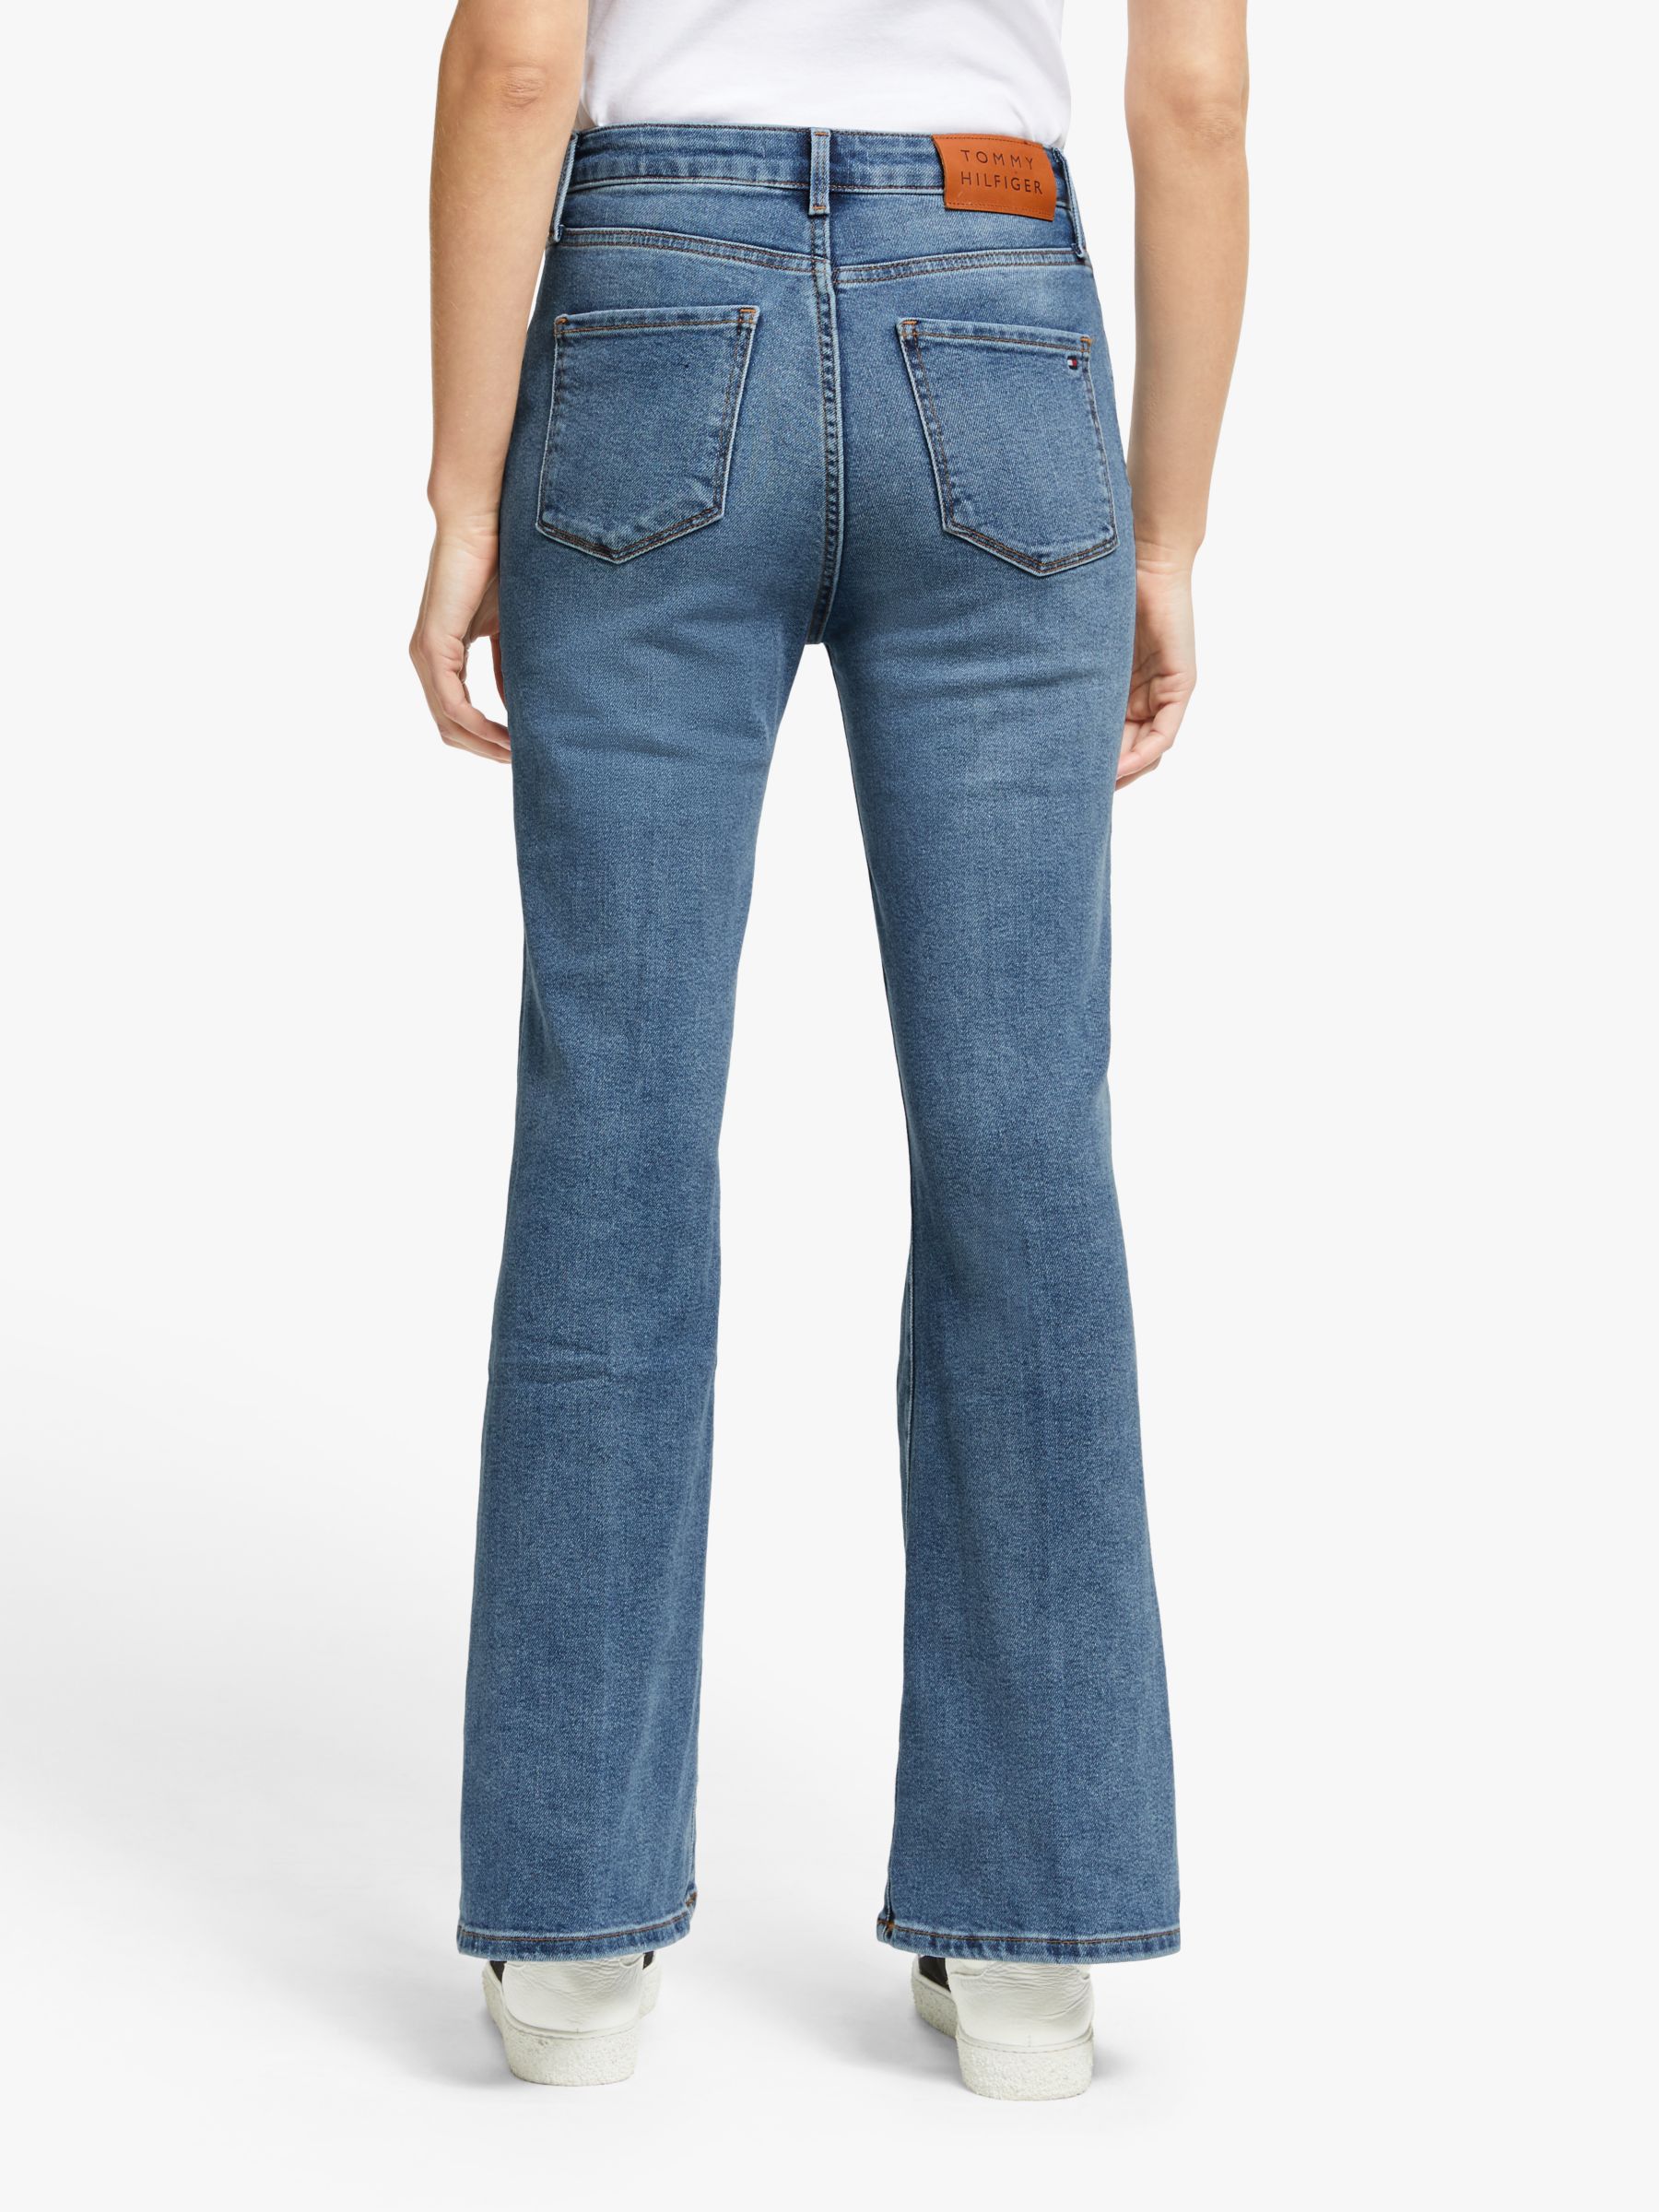 Tommy Hilfiger Bootcut Jeans, Rocco at John Lewis & Partners